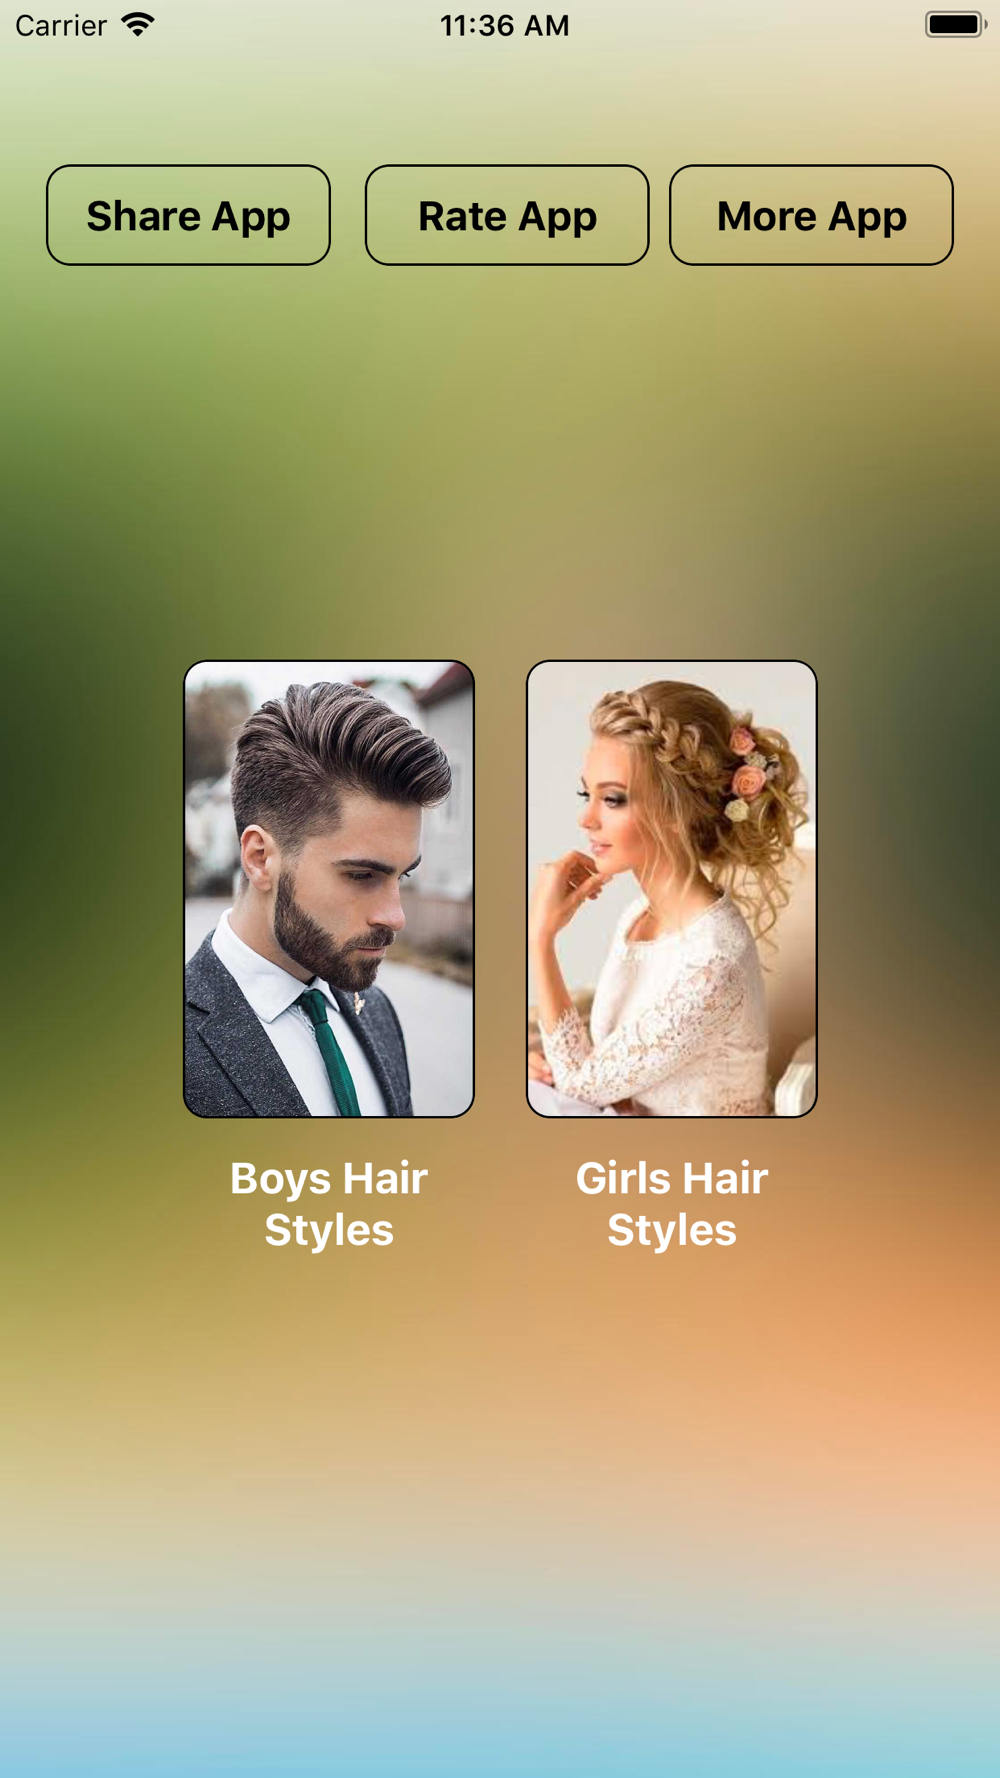 Girl and Boys Hair Style Free Download App for iPhone 